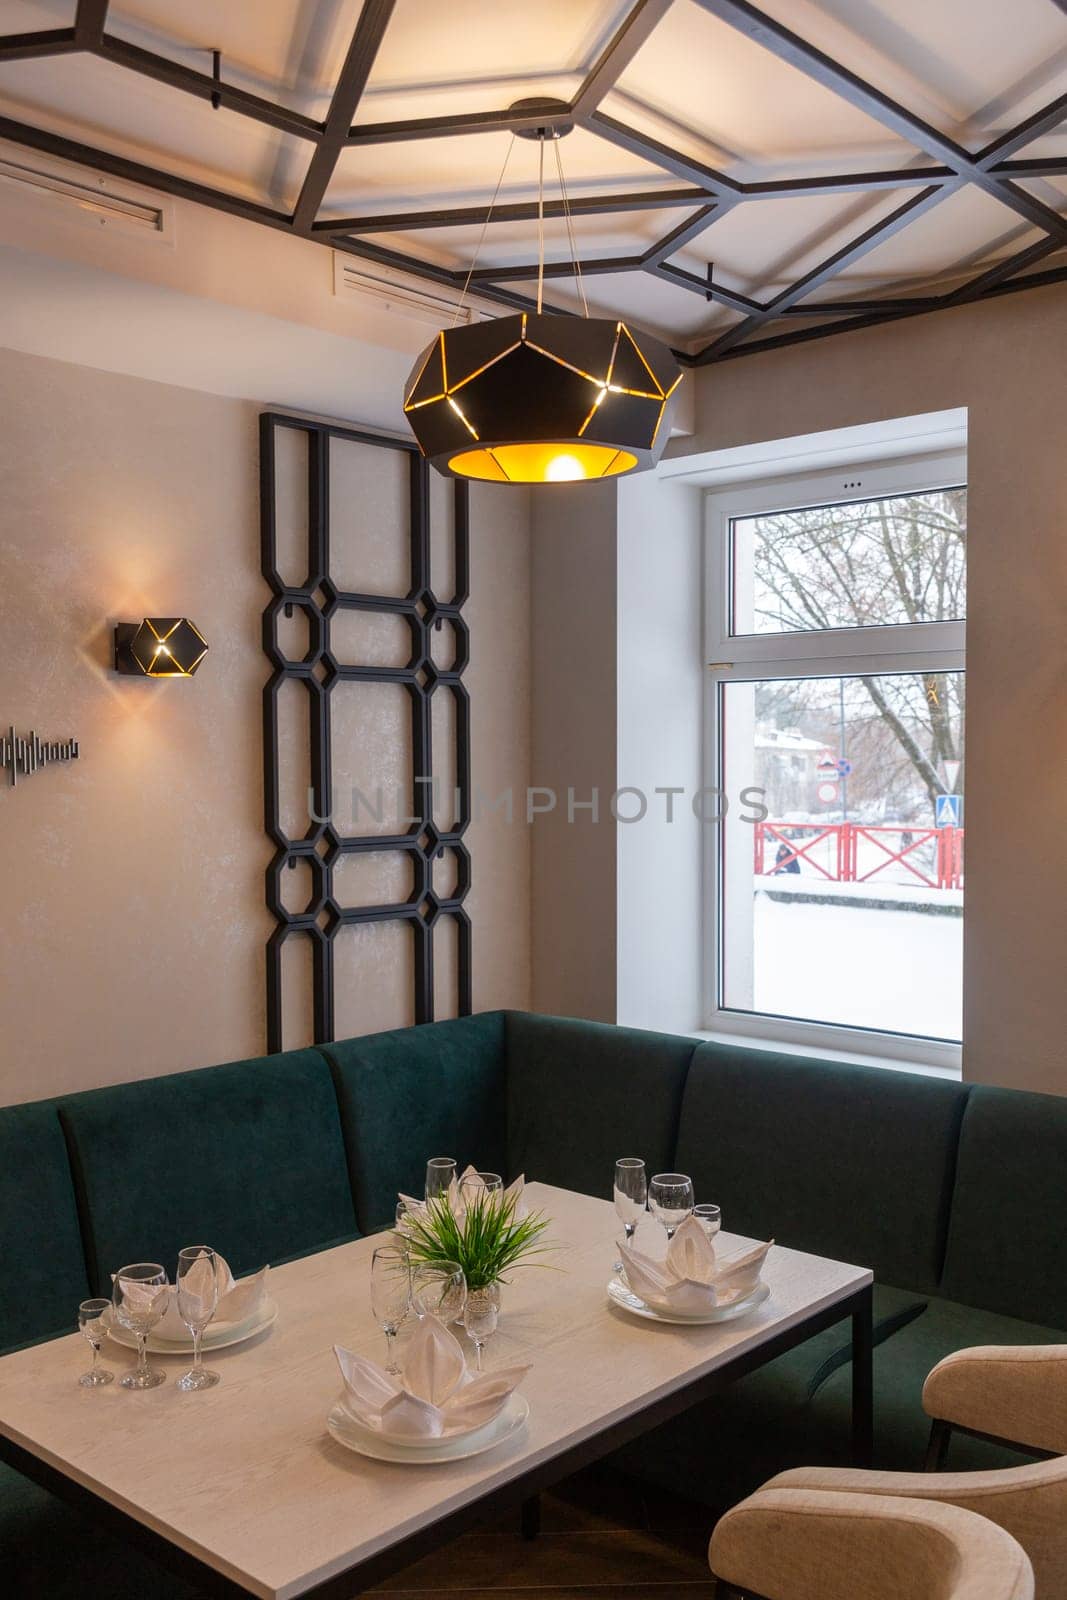 Modern interior of urban restaurant or cafe with dining places. Soft green sofas and beige chairs around tables served with glasses, plates and napkins.